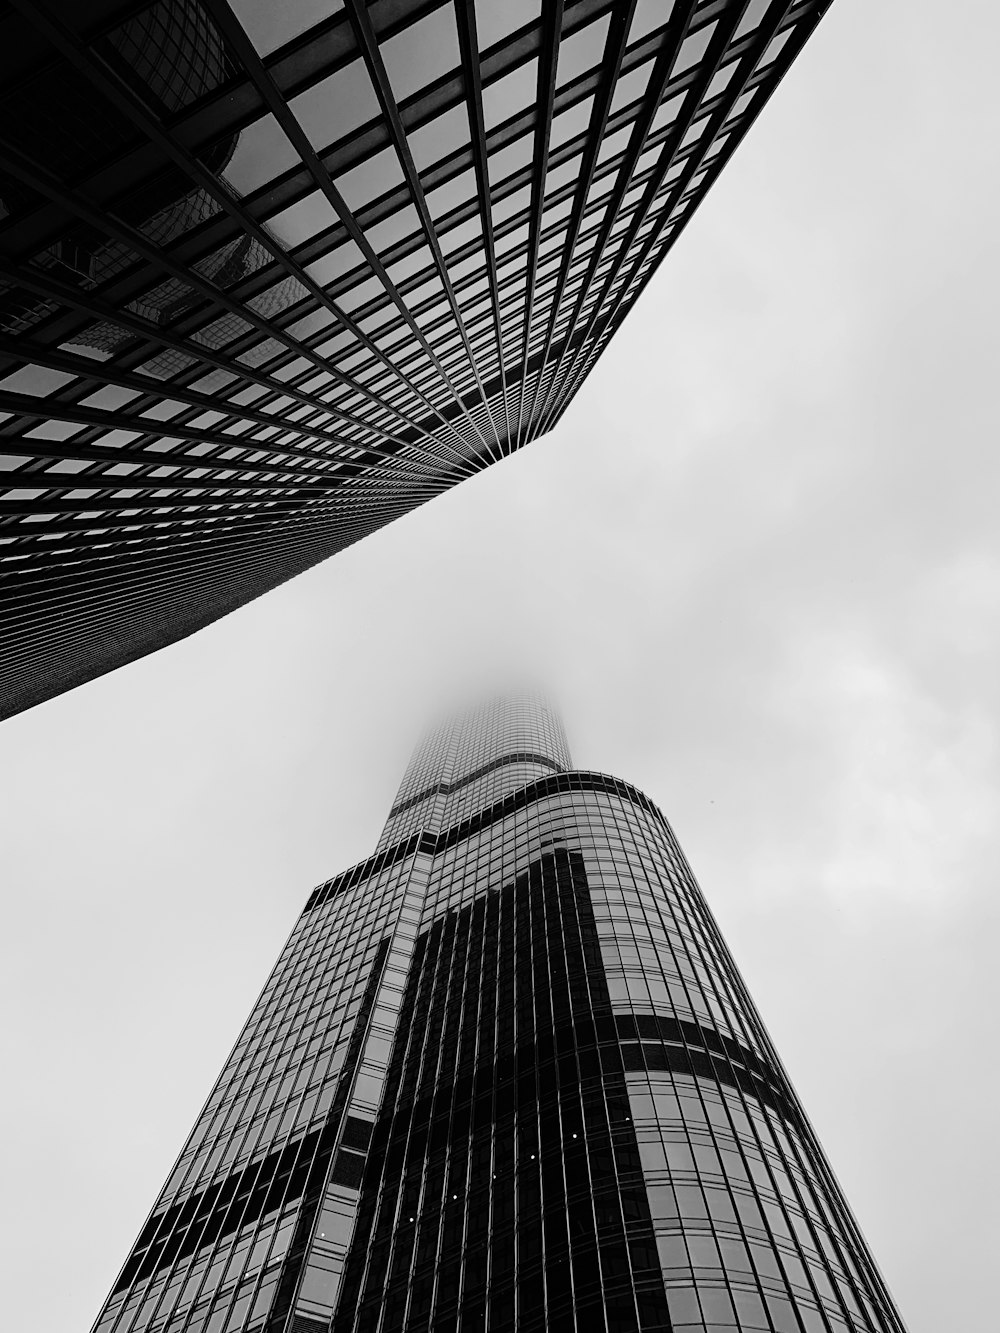 Worm's-eye view of tower building photo – Free Grey Image on Unsplash